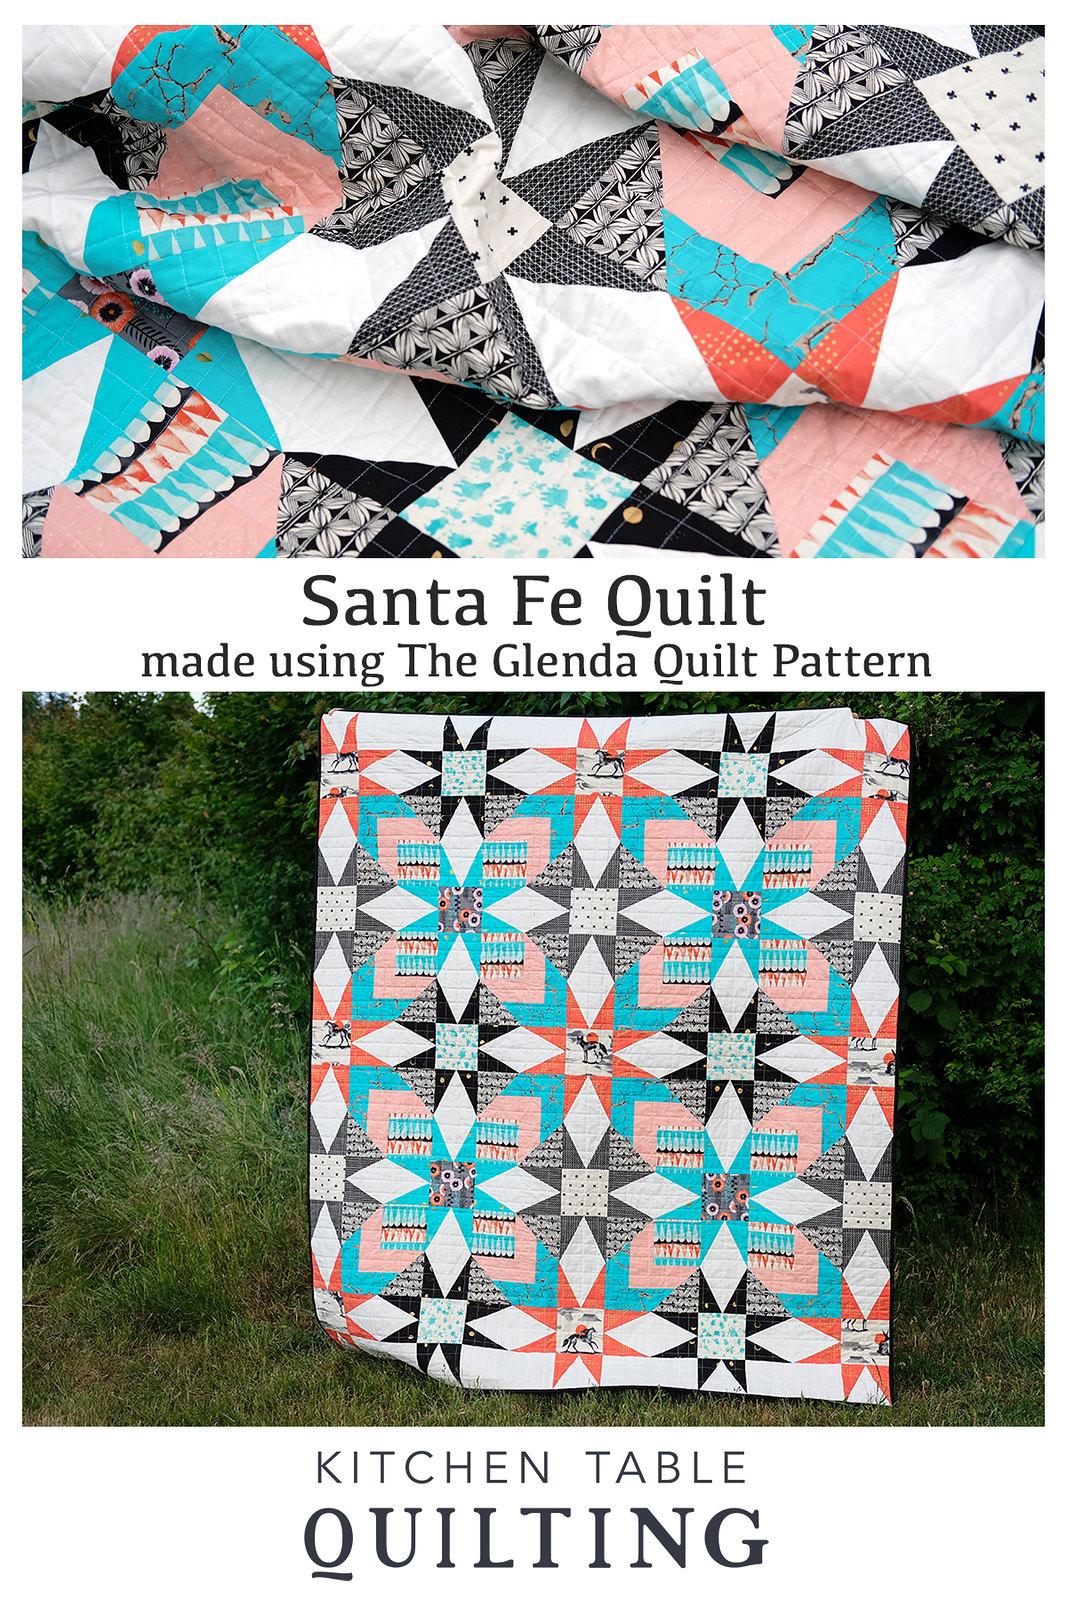 Santa Fe Quilt - Made Using the Glenda Quilt Pattern by Kitchen Table Quilting